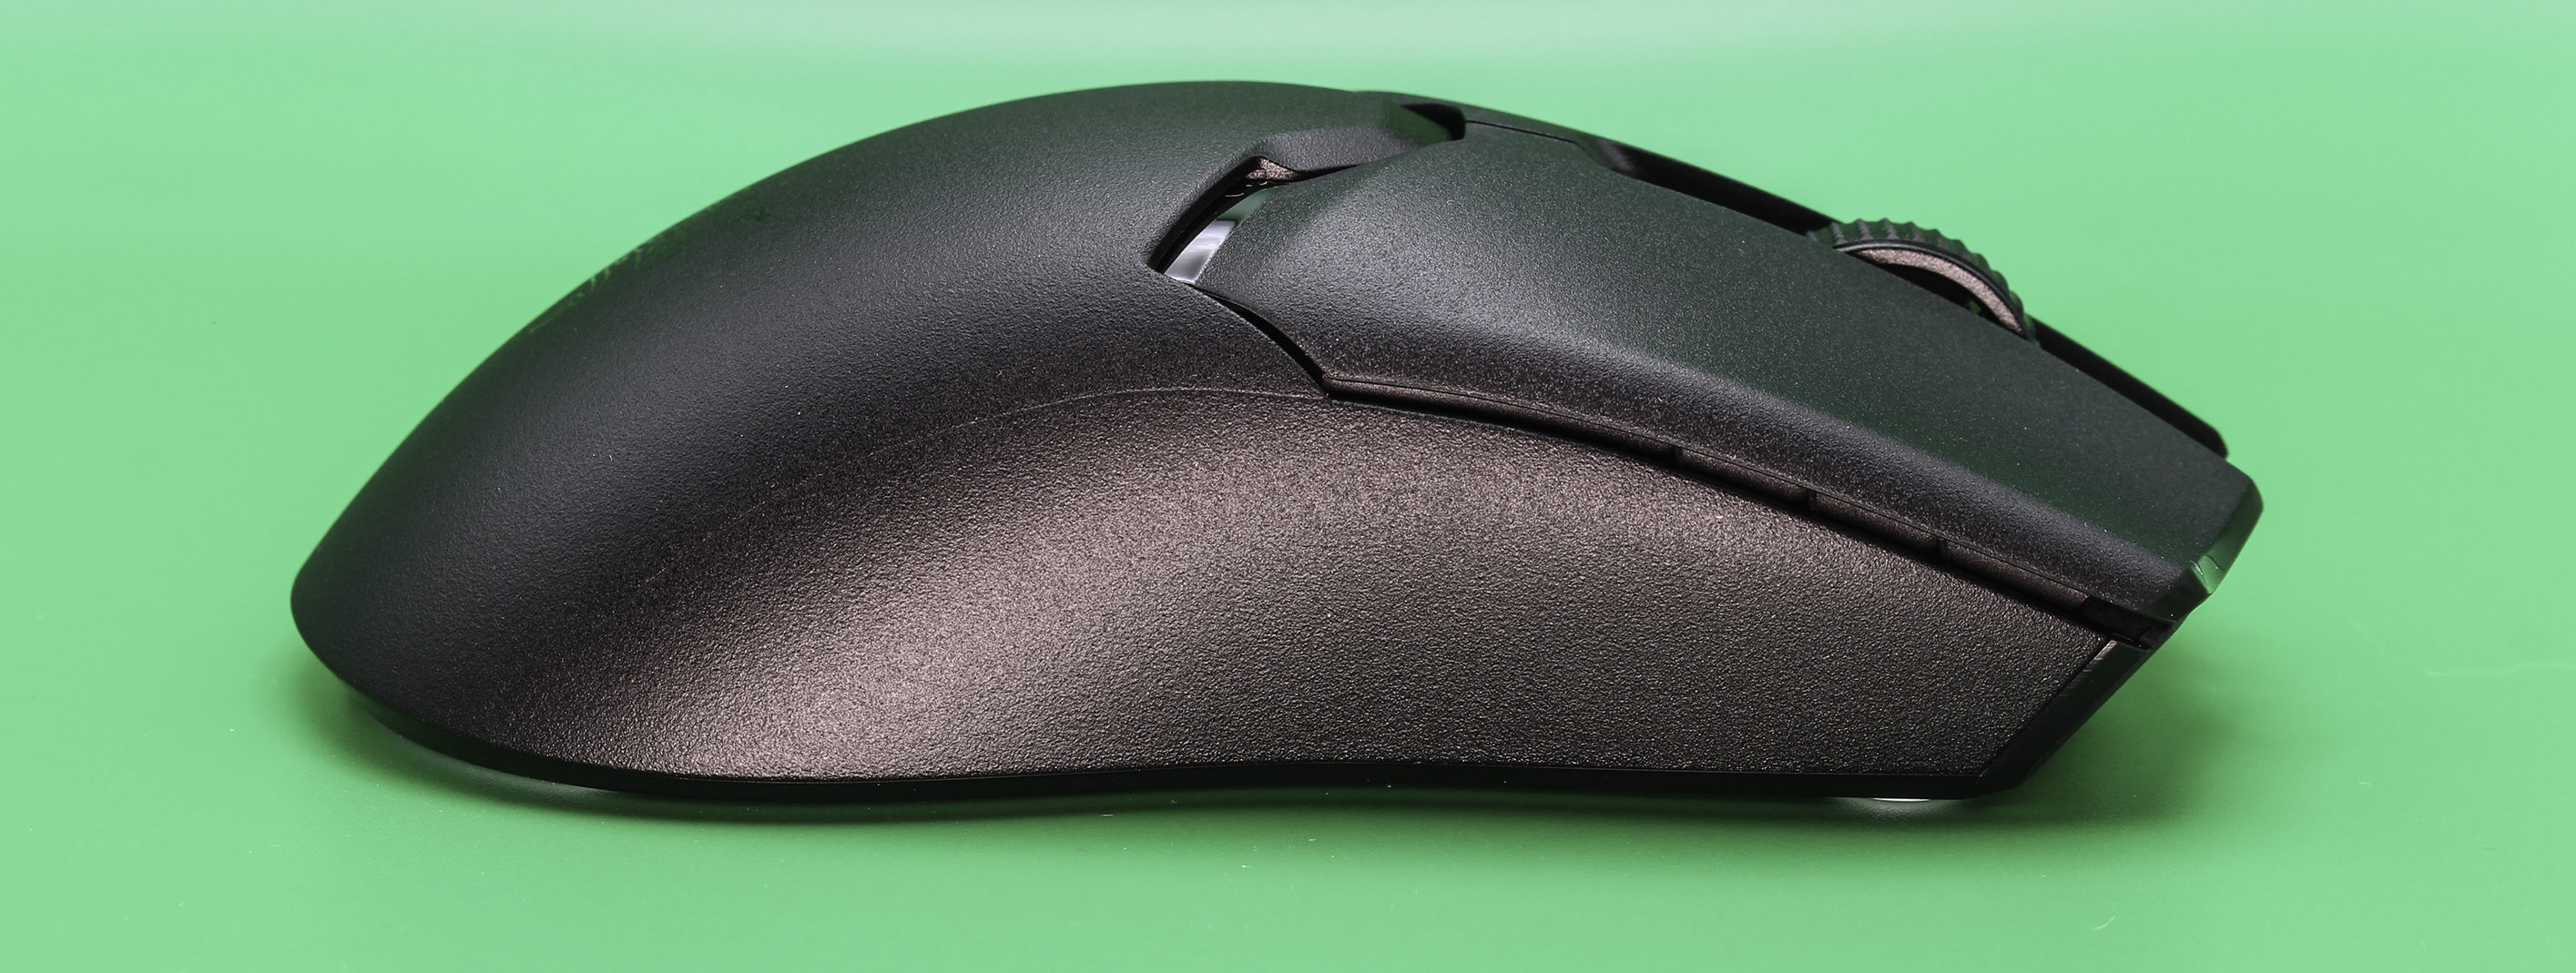 Razer Viper V2 Pro review: Why is this mouse controversial? | ZDNET